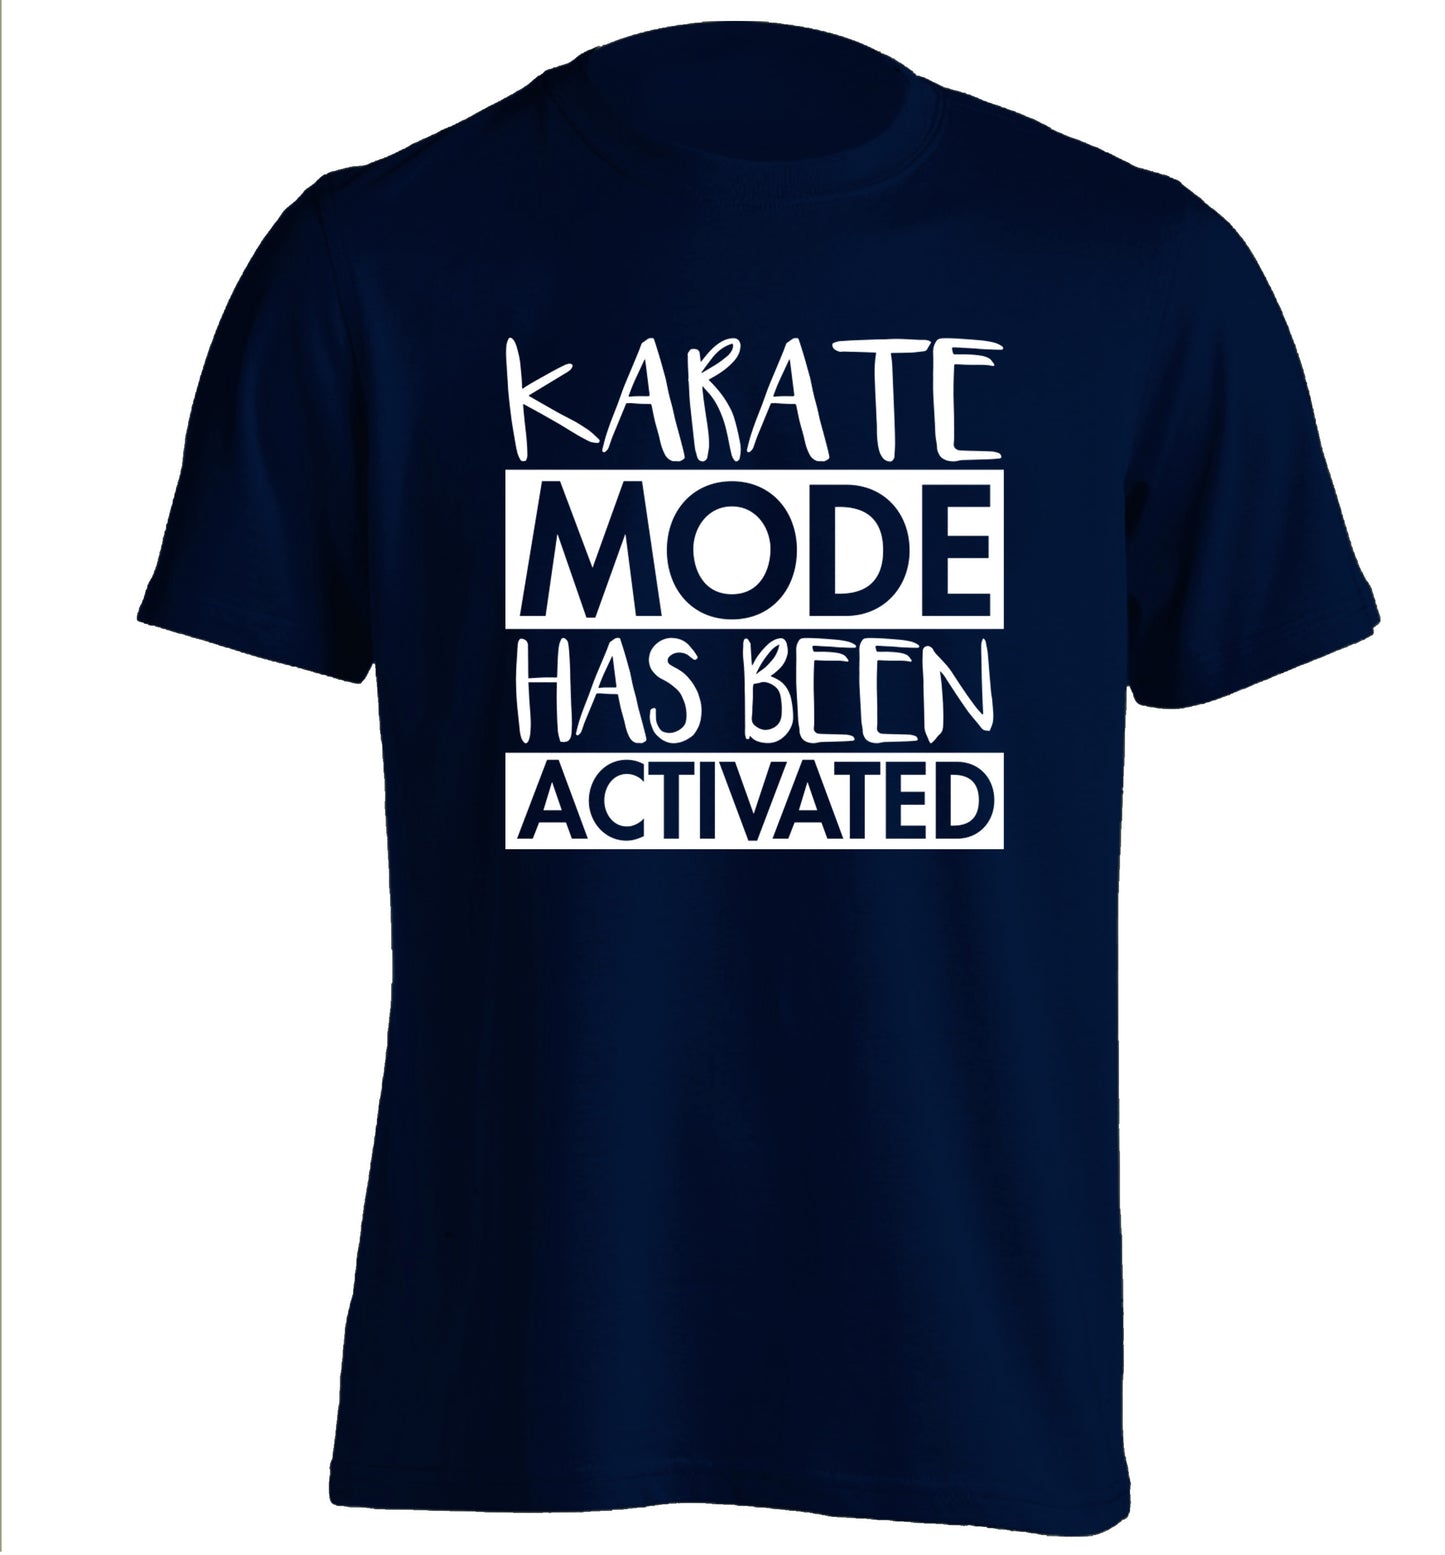 Karate mode activated adults unisex navy Tshirt 2XL